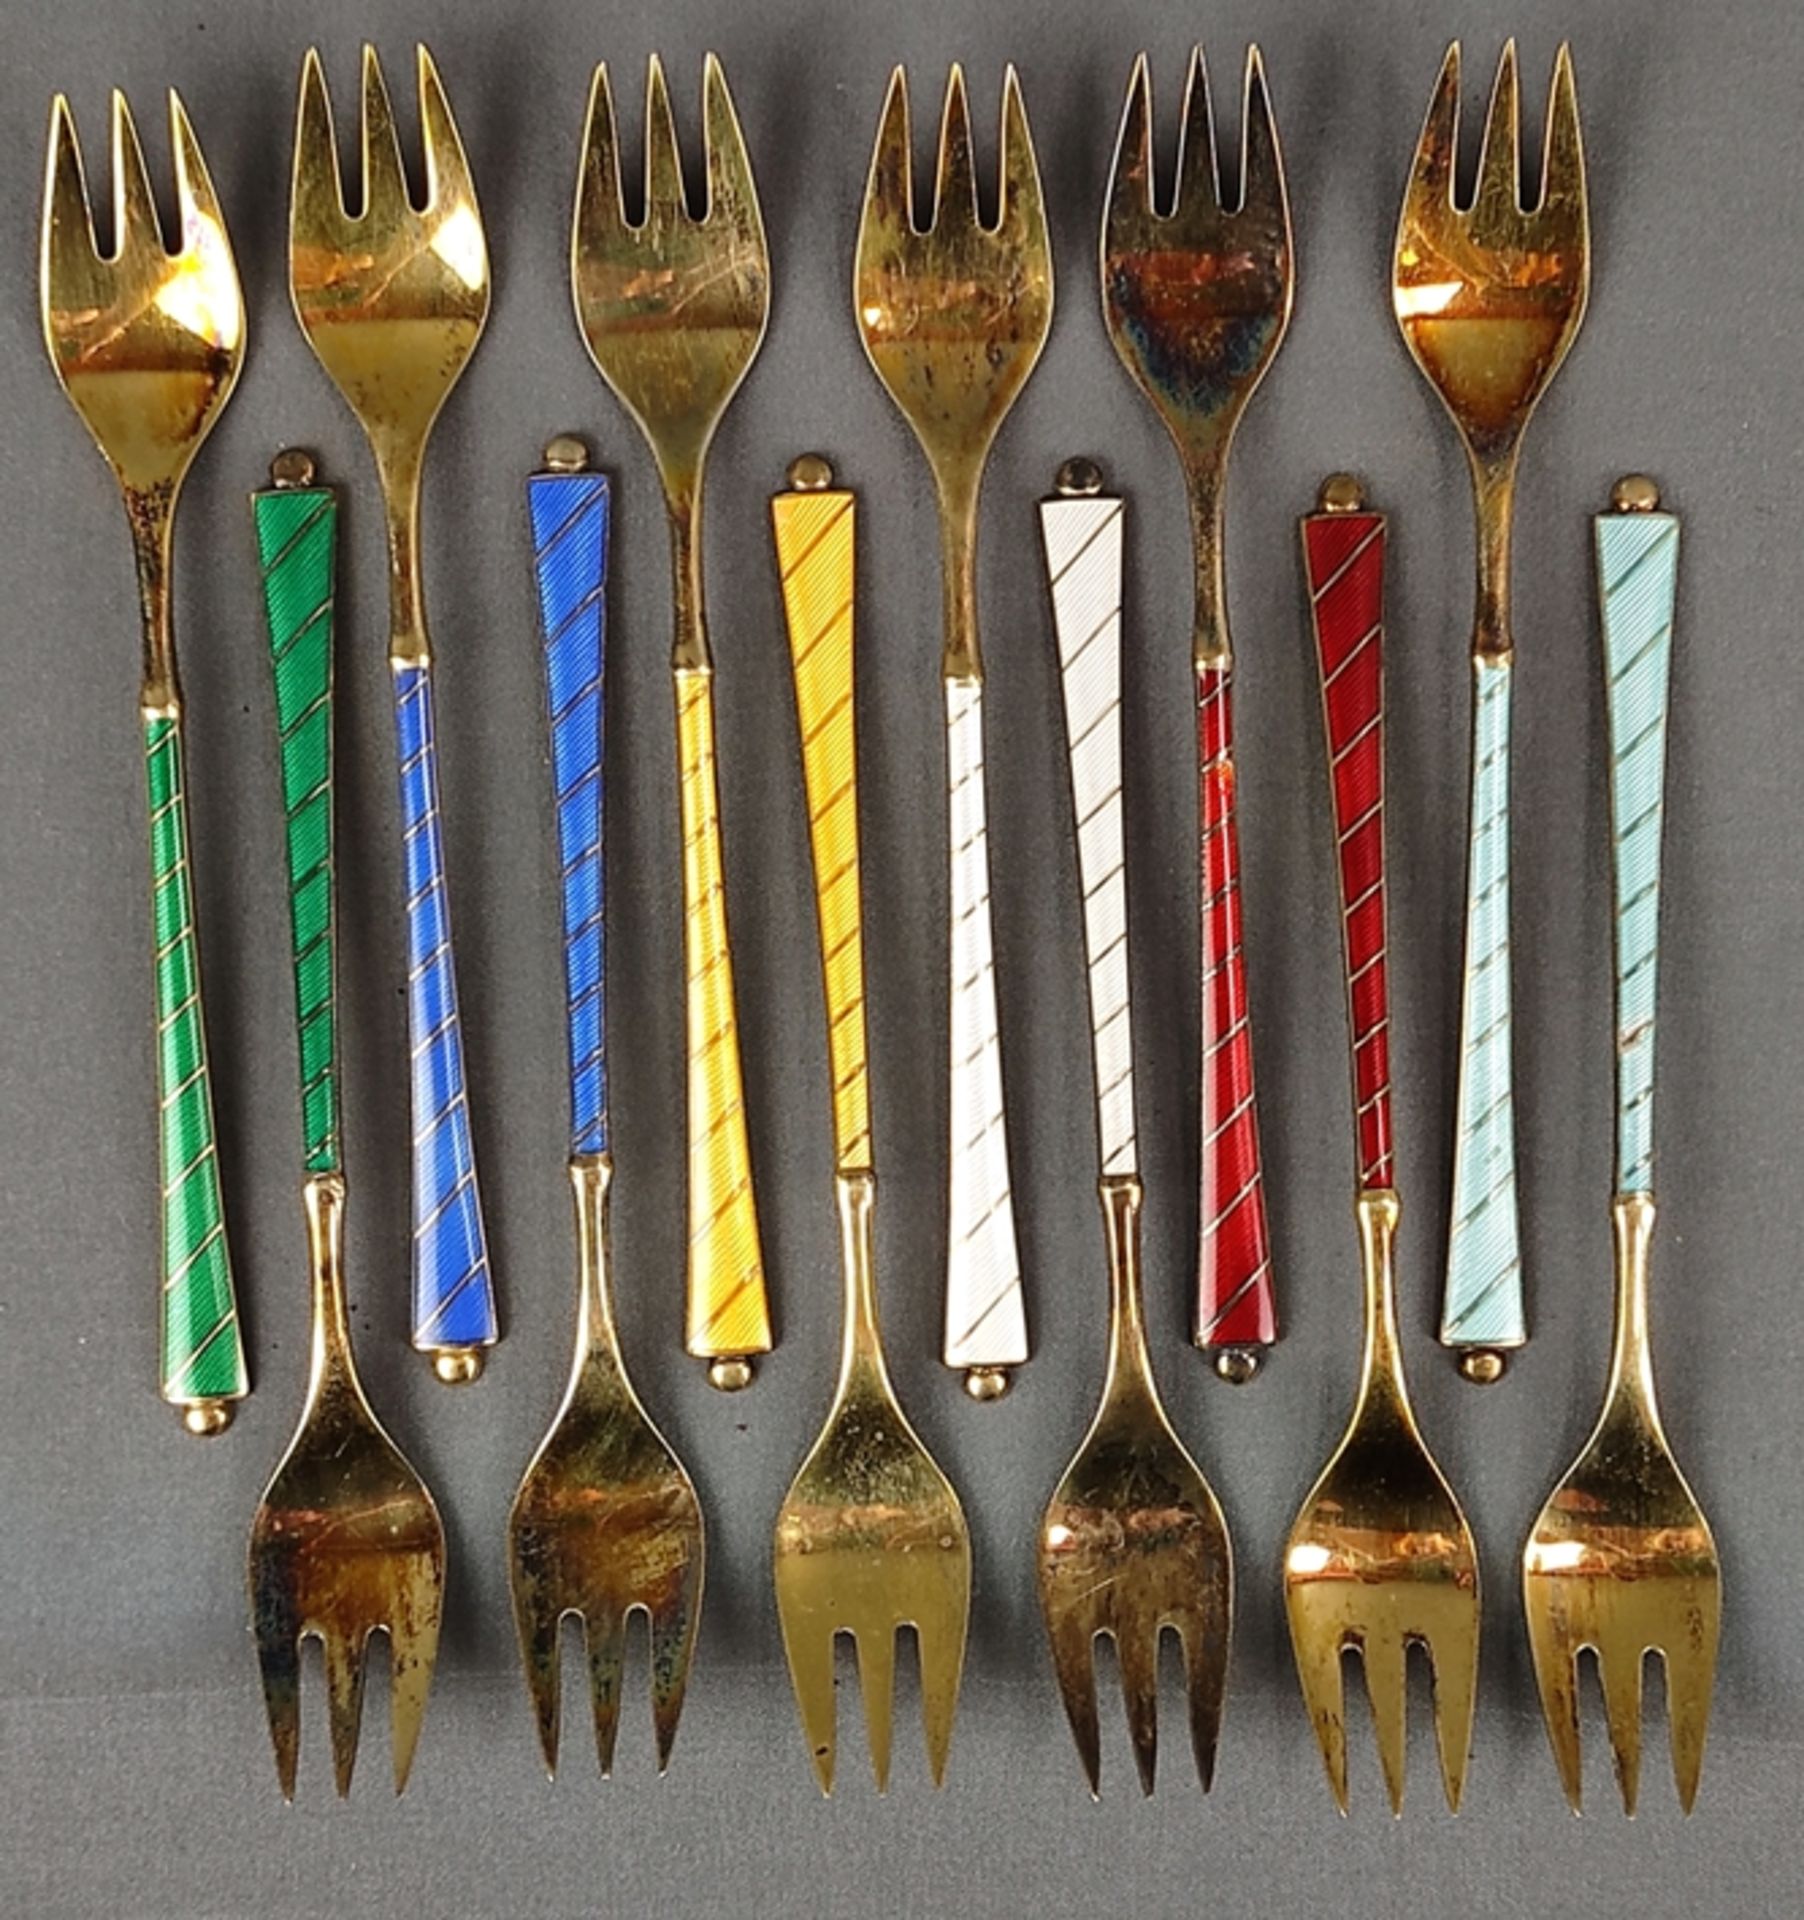 12 cake forks, sterling silver, 194g, Denmark, Egon Lauridsen, marked Ela, two each in the same col - Image 2 of 4